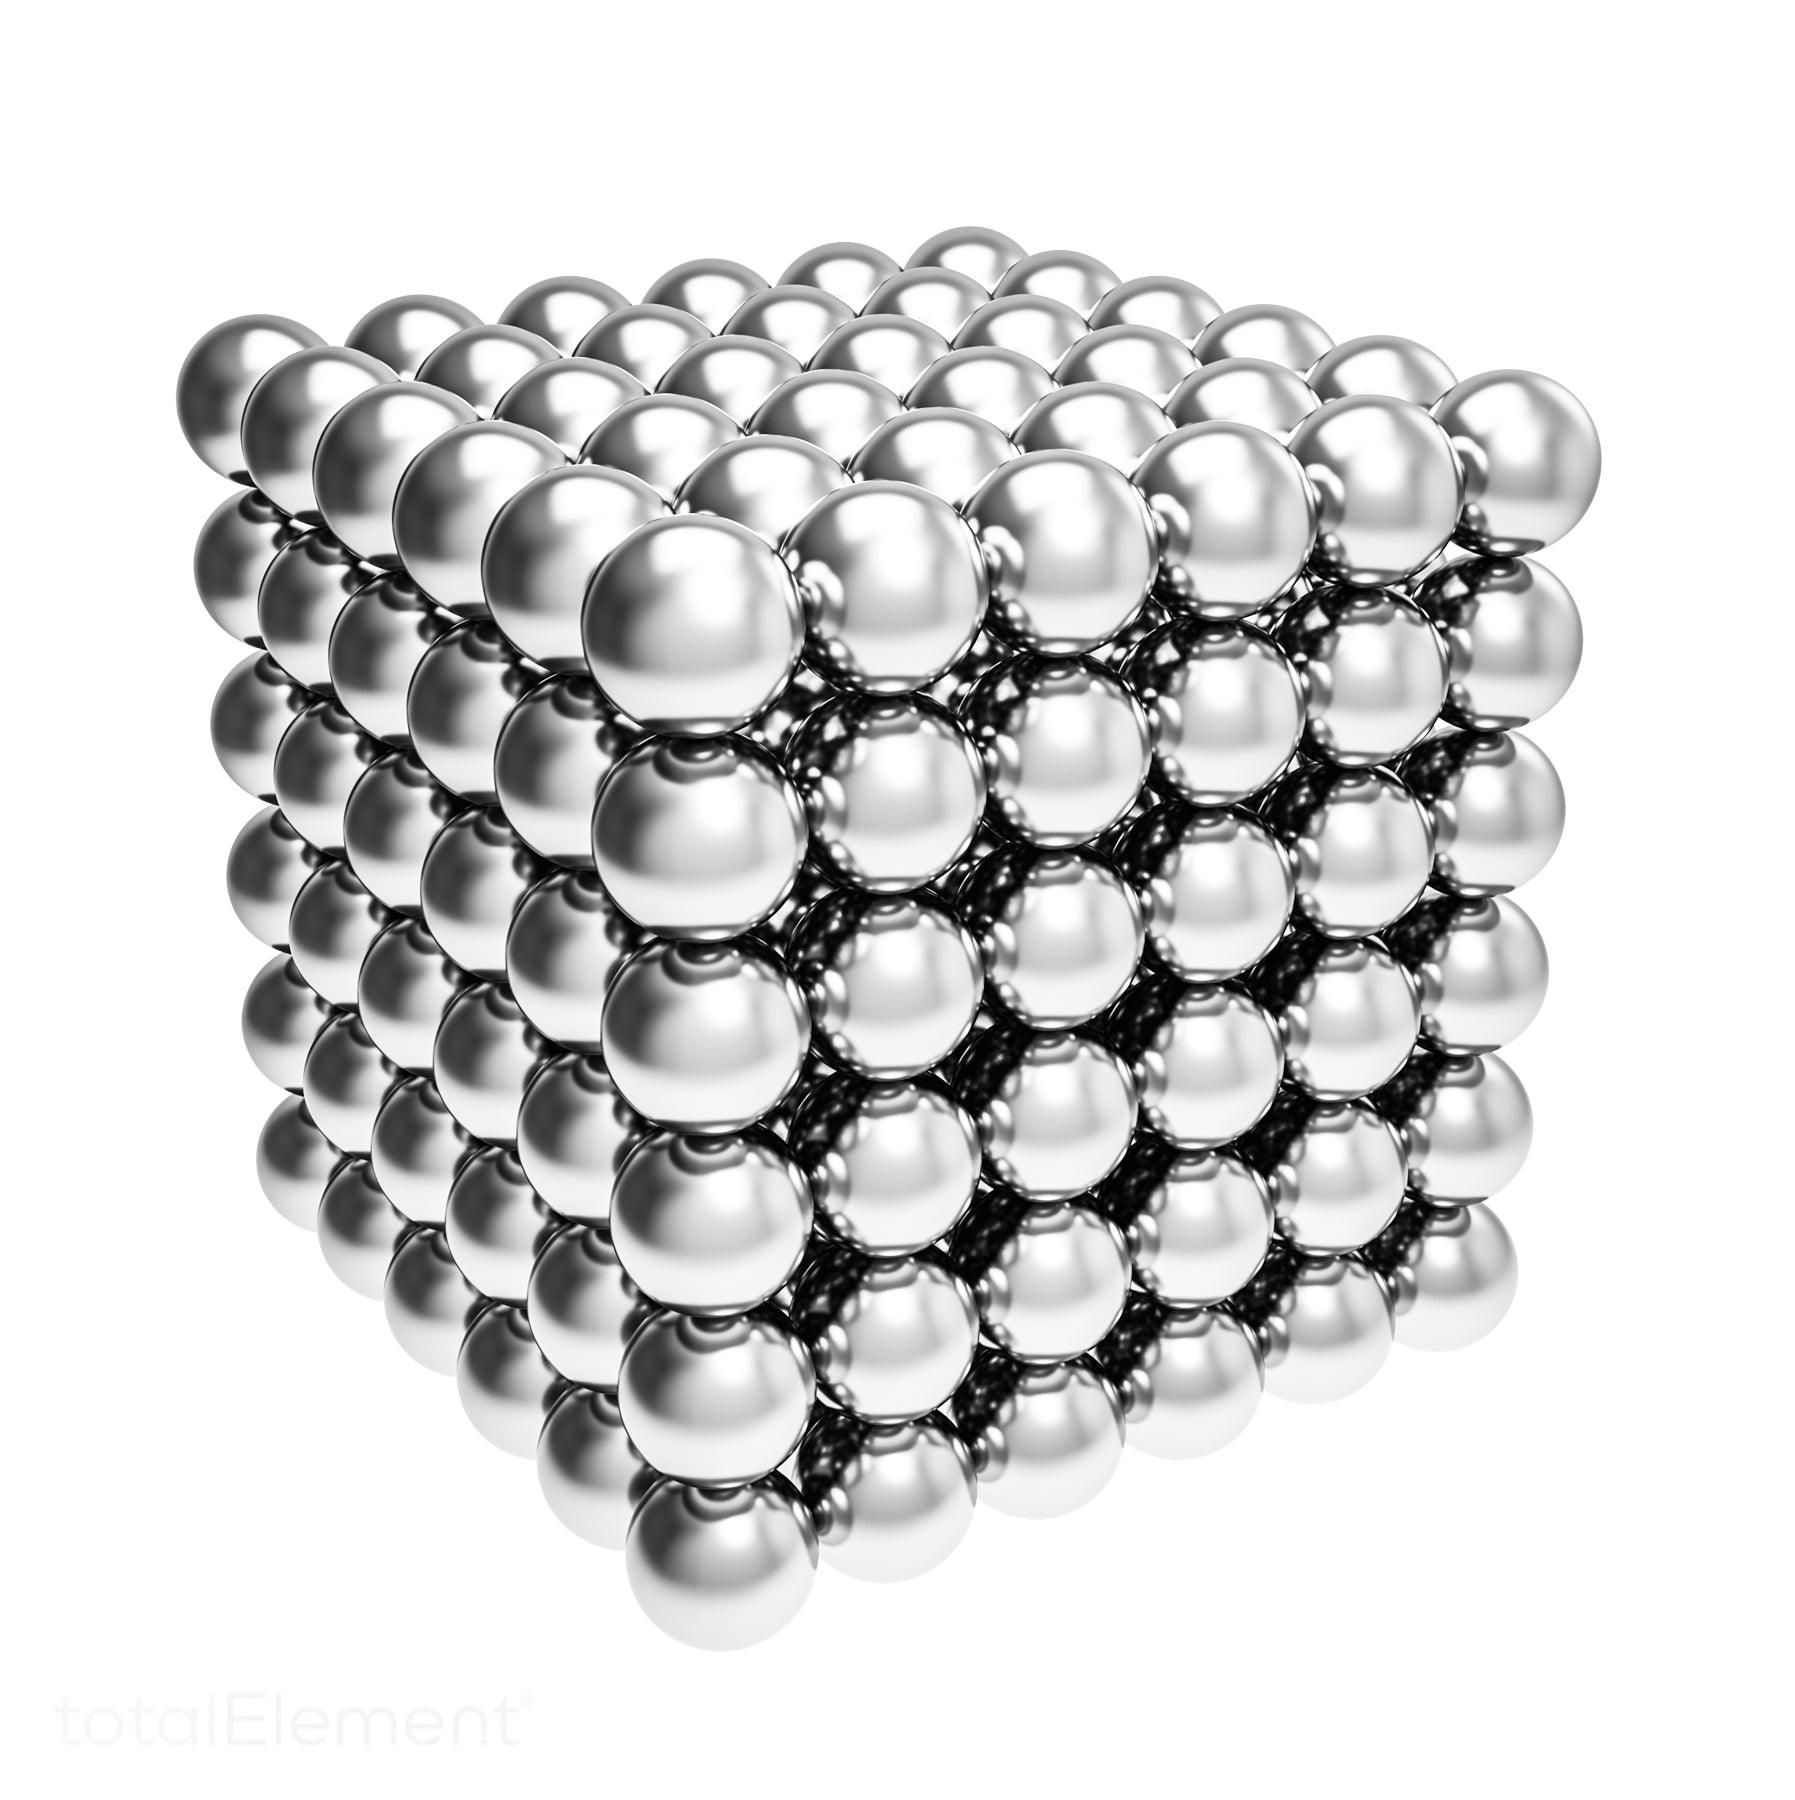 Pack)　Rare　(216　N35　Magnets　Neodymium　Sphere/Ball　Earth　5mm　totalElement　for　Sale